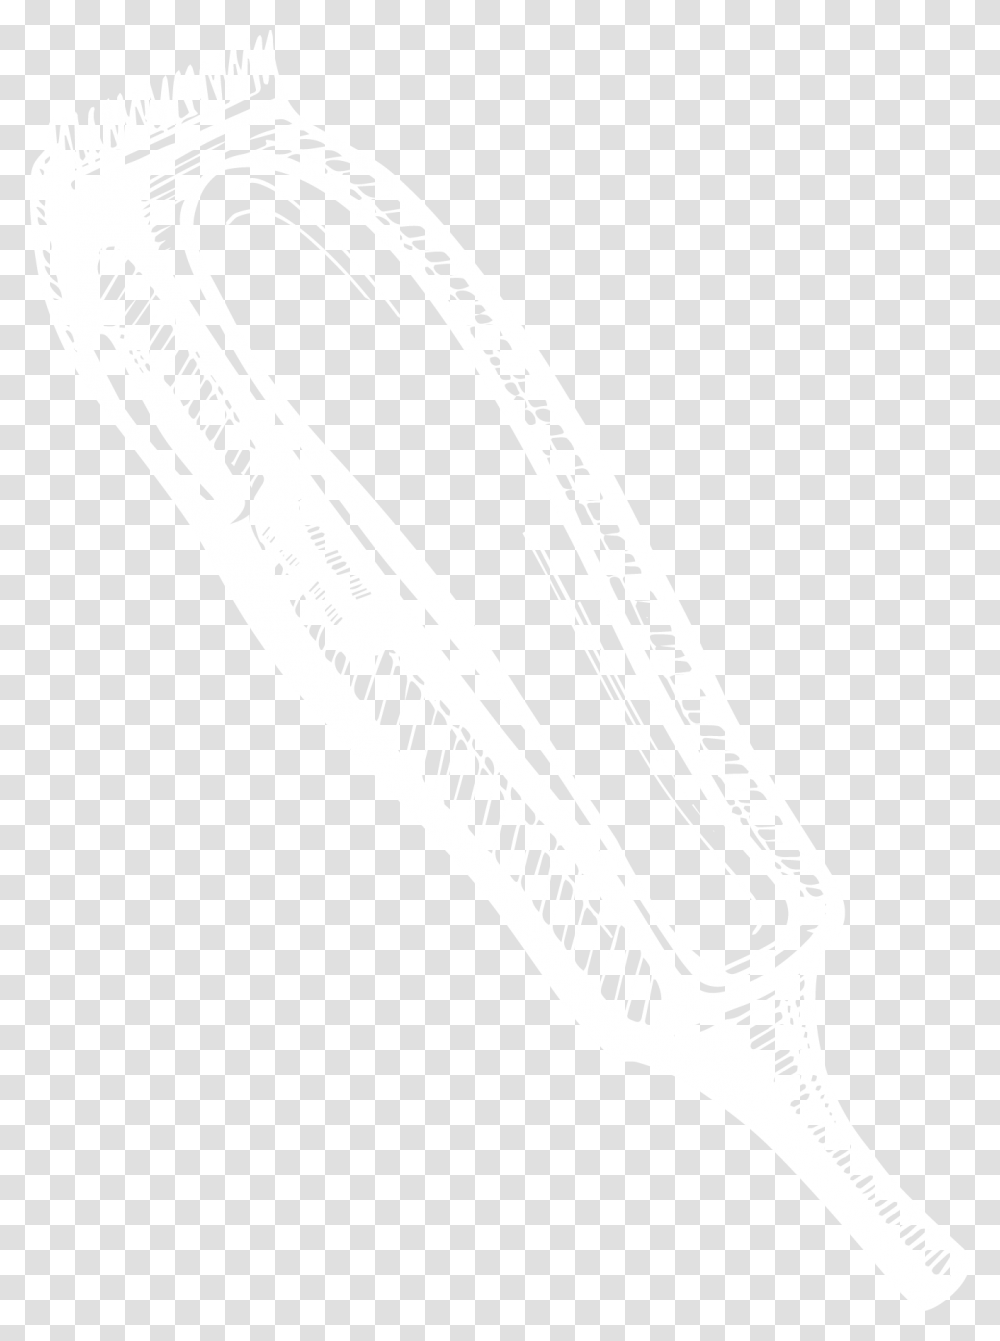 Barber Tools Converted Field Lacrosse, White, Texture, White Board Transparent Png